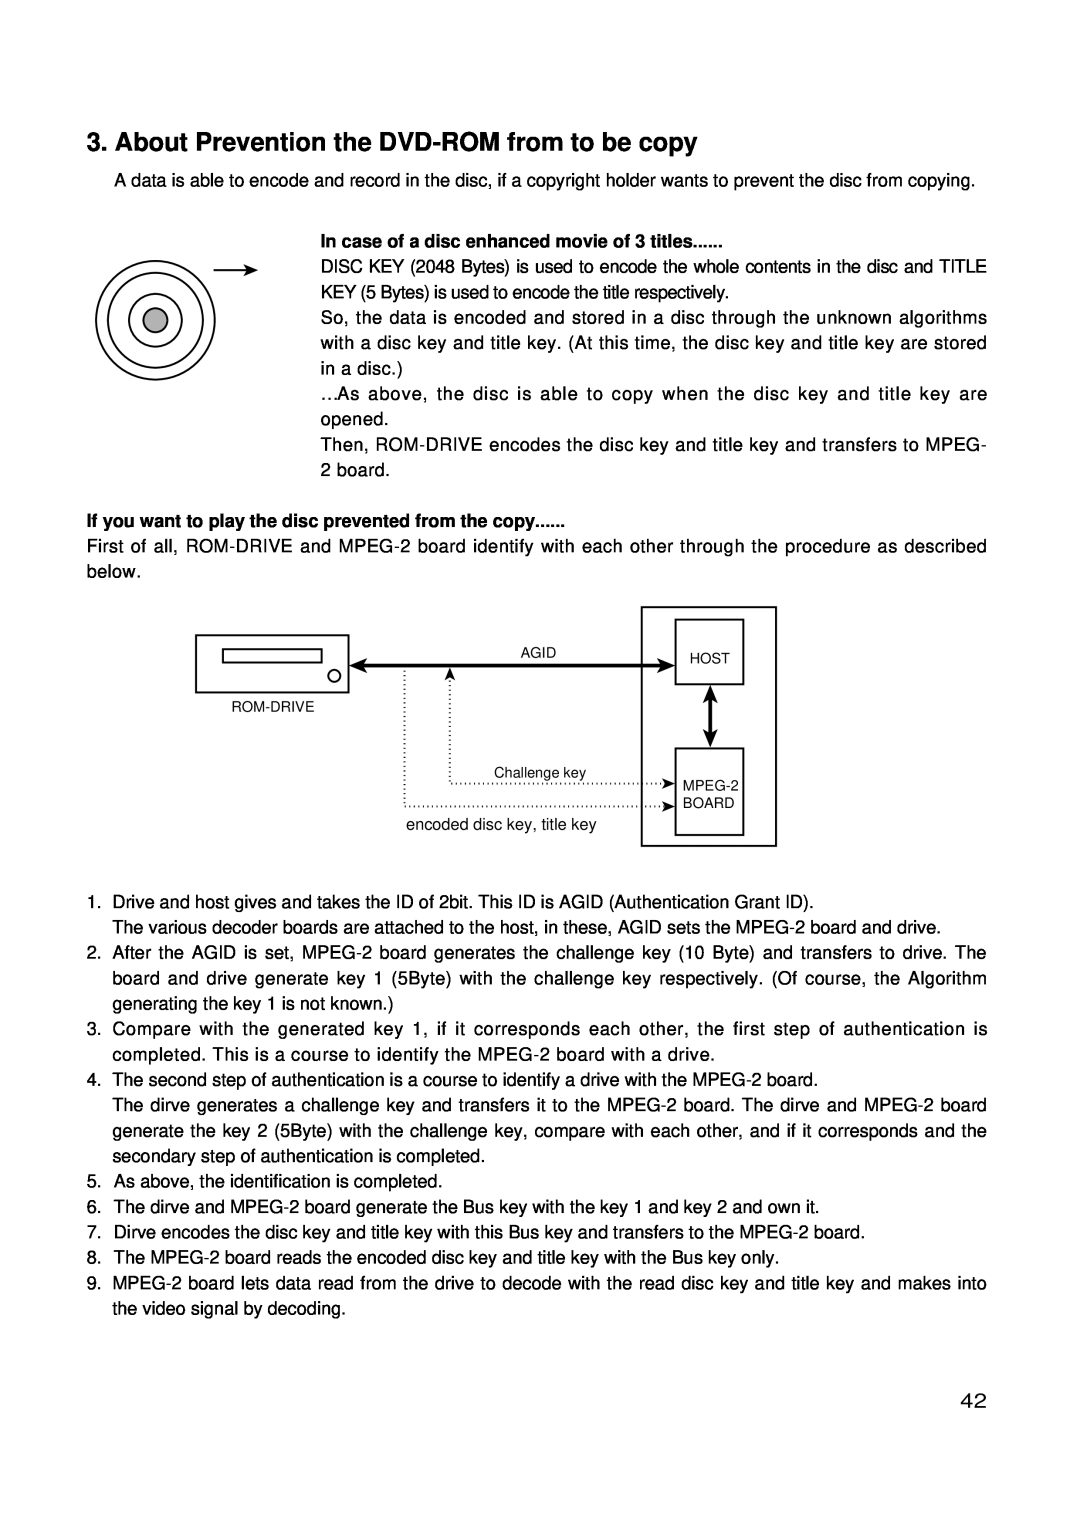 LG Electronics GSA-4167B About Prevention the DVD-ROM from to be copy, In case of a disc enhanced movie of 3 titles 